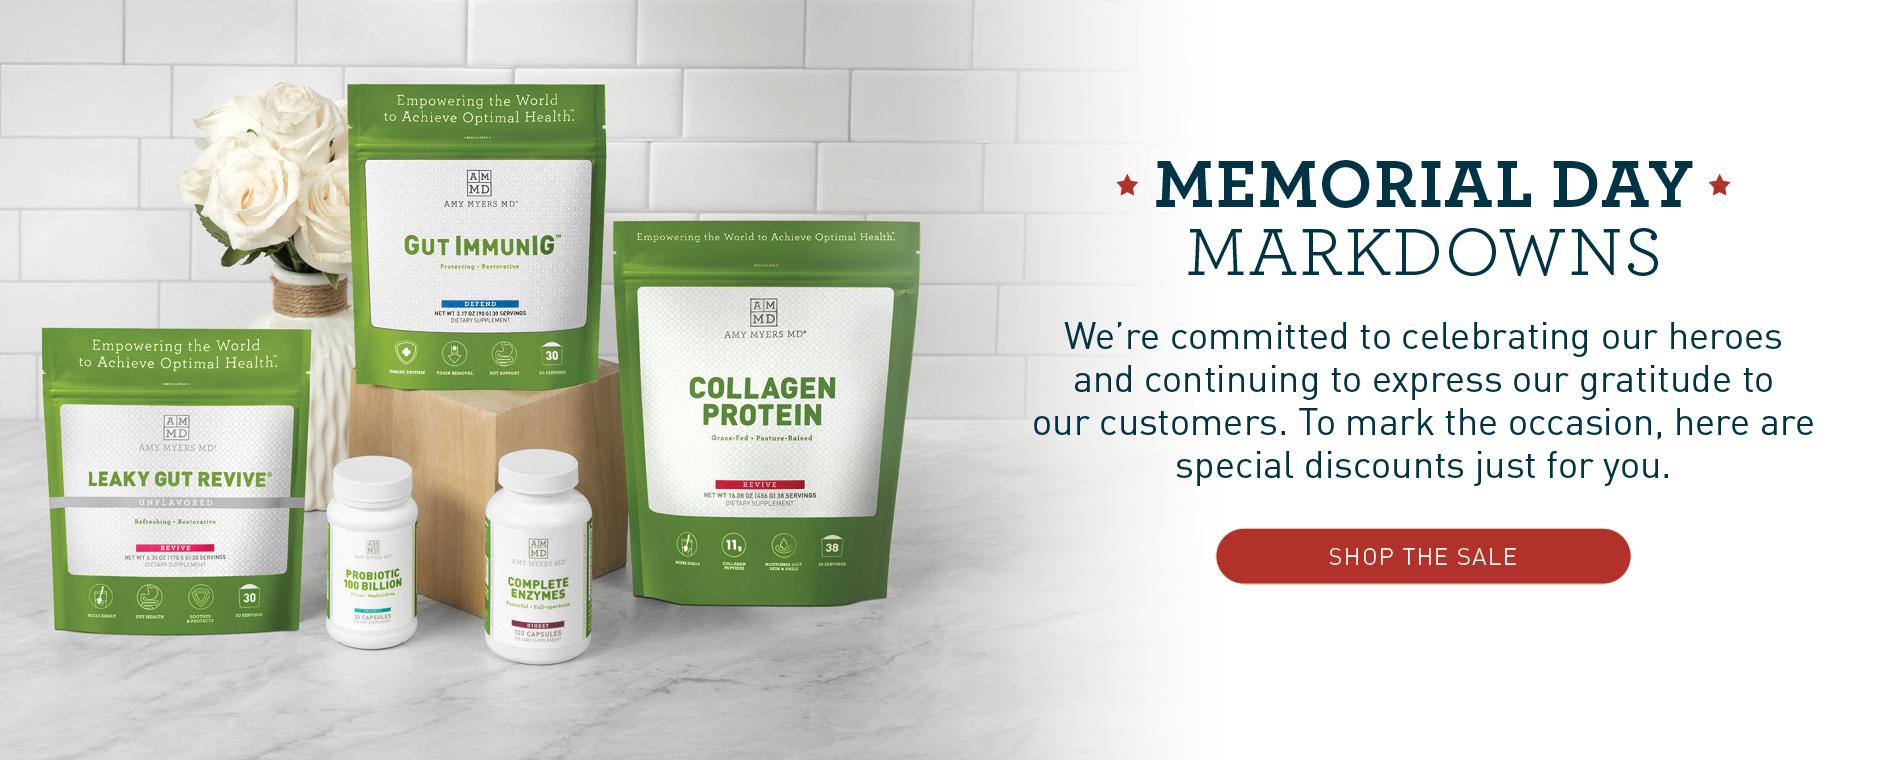 Memorial Day Markdowns. We're committed to celebrating our heroes and continuing to express our gratitude to our customers. To mark the occasion, here are special discounts just for you. Shop the Sale.